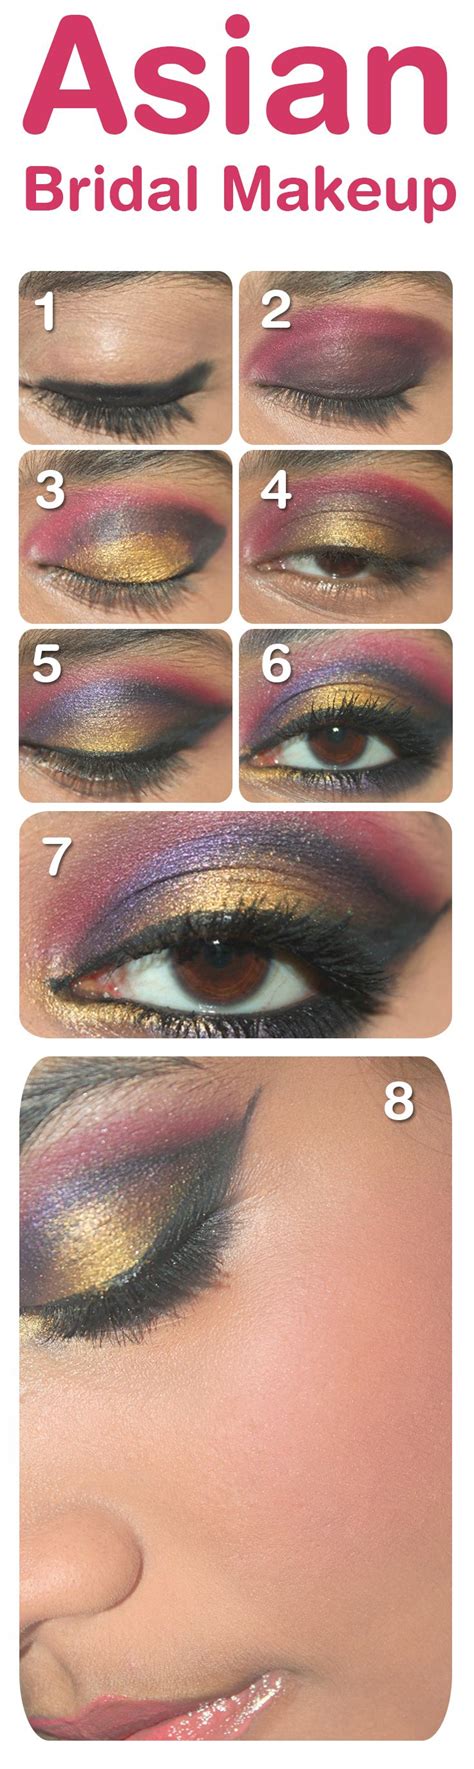 10 easy steps for asian bridal makeup step by step tutorial with images asian bridal makeup